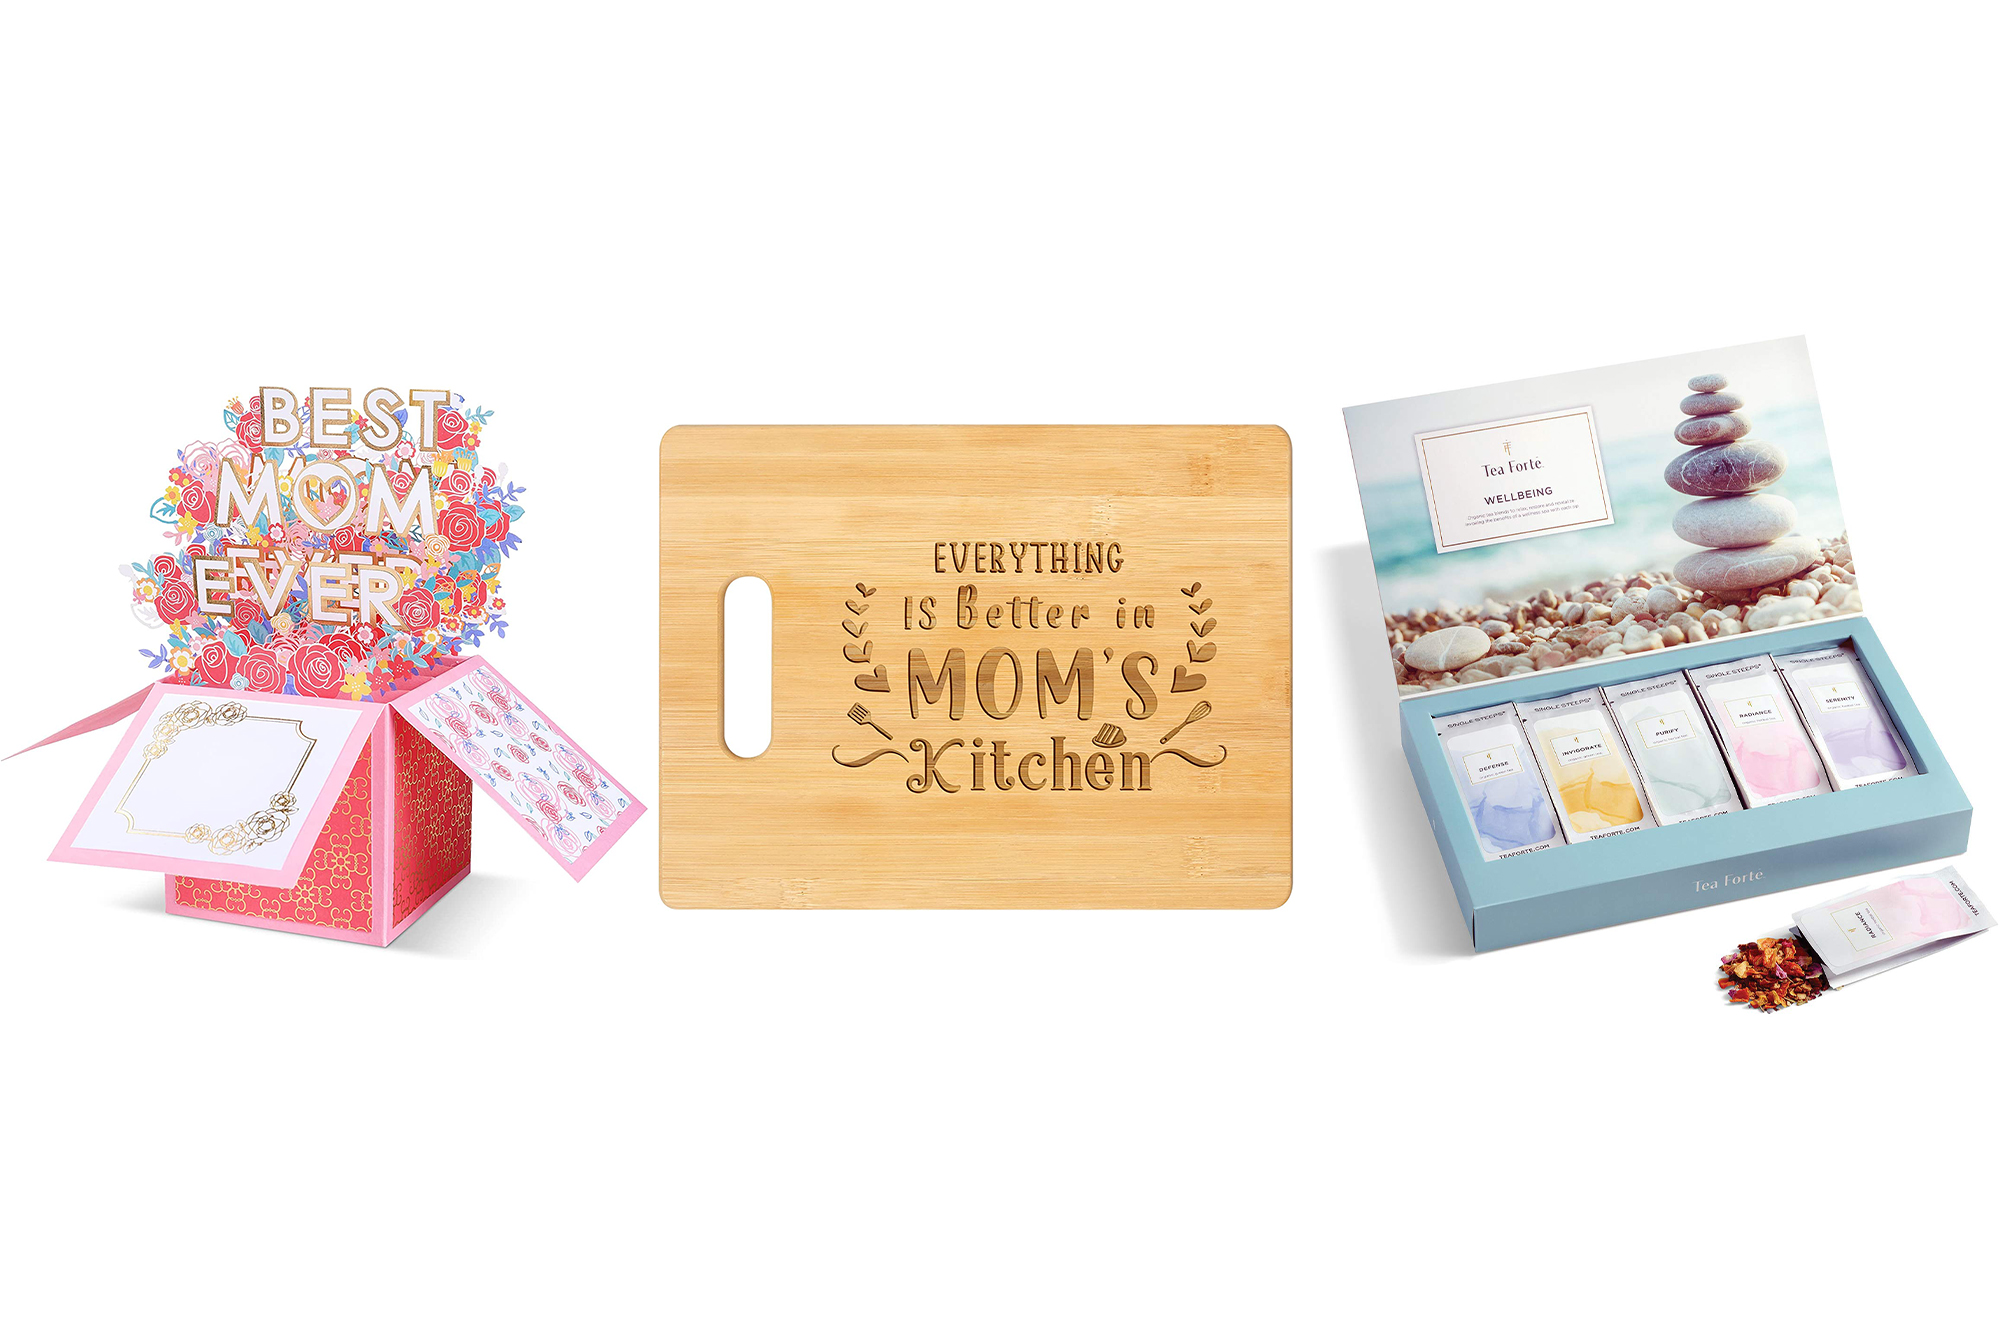 45 Cheap Mother's Day Gifts — Mother's Day Gifts Under $40